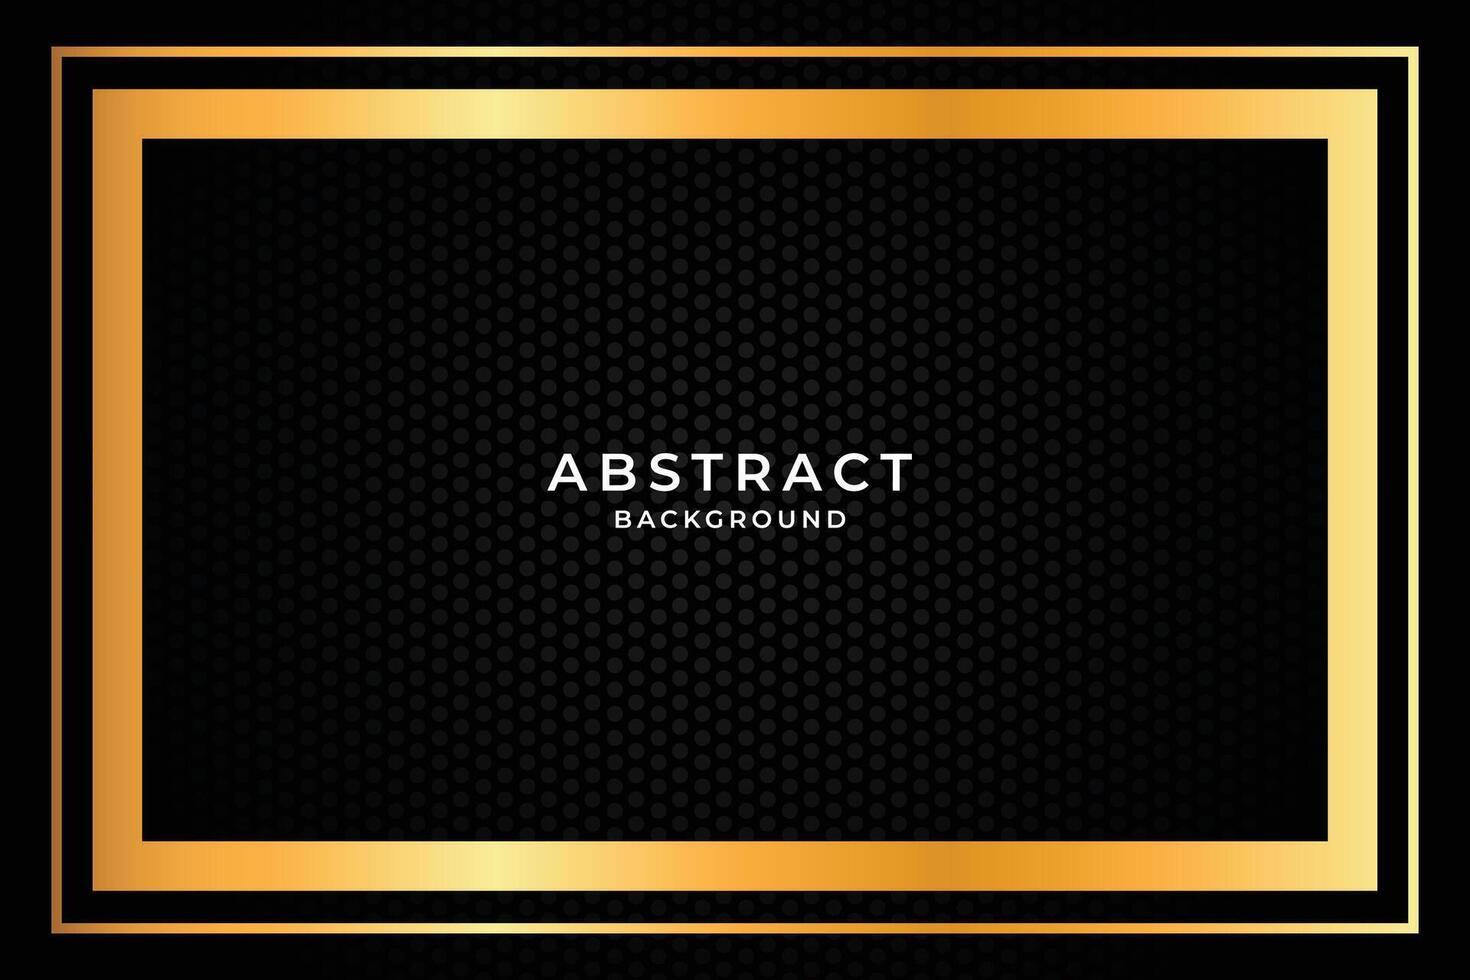 Abstract premium black and gold geometric background Free Vector